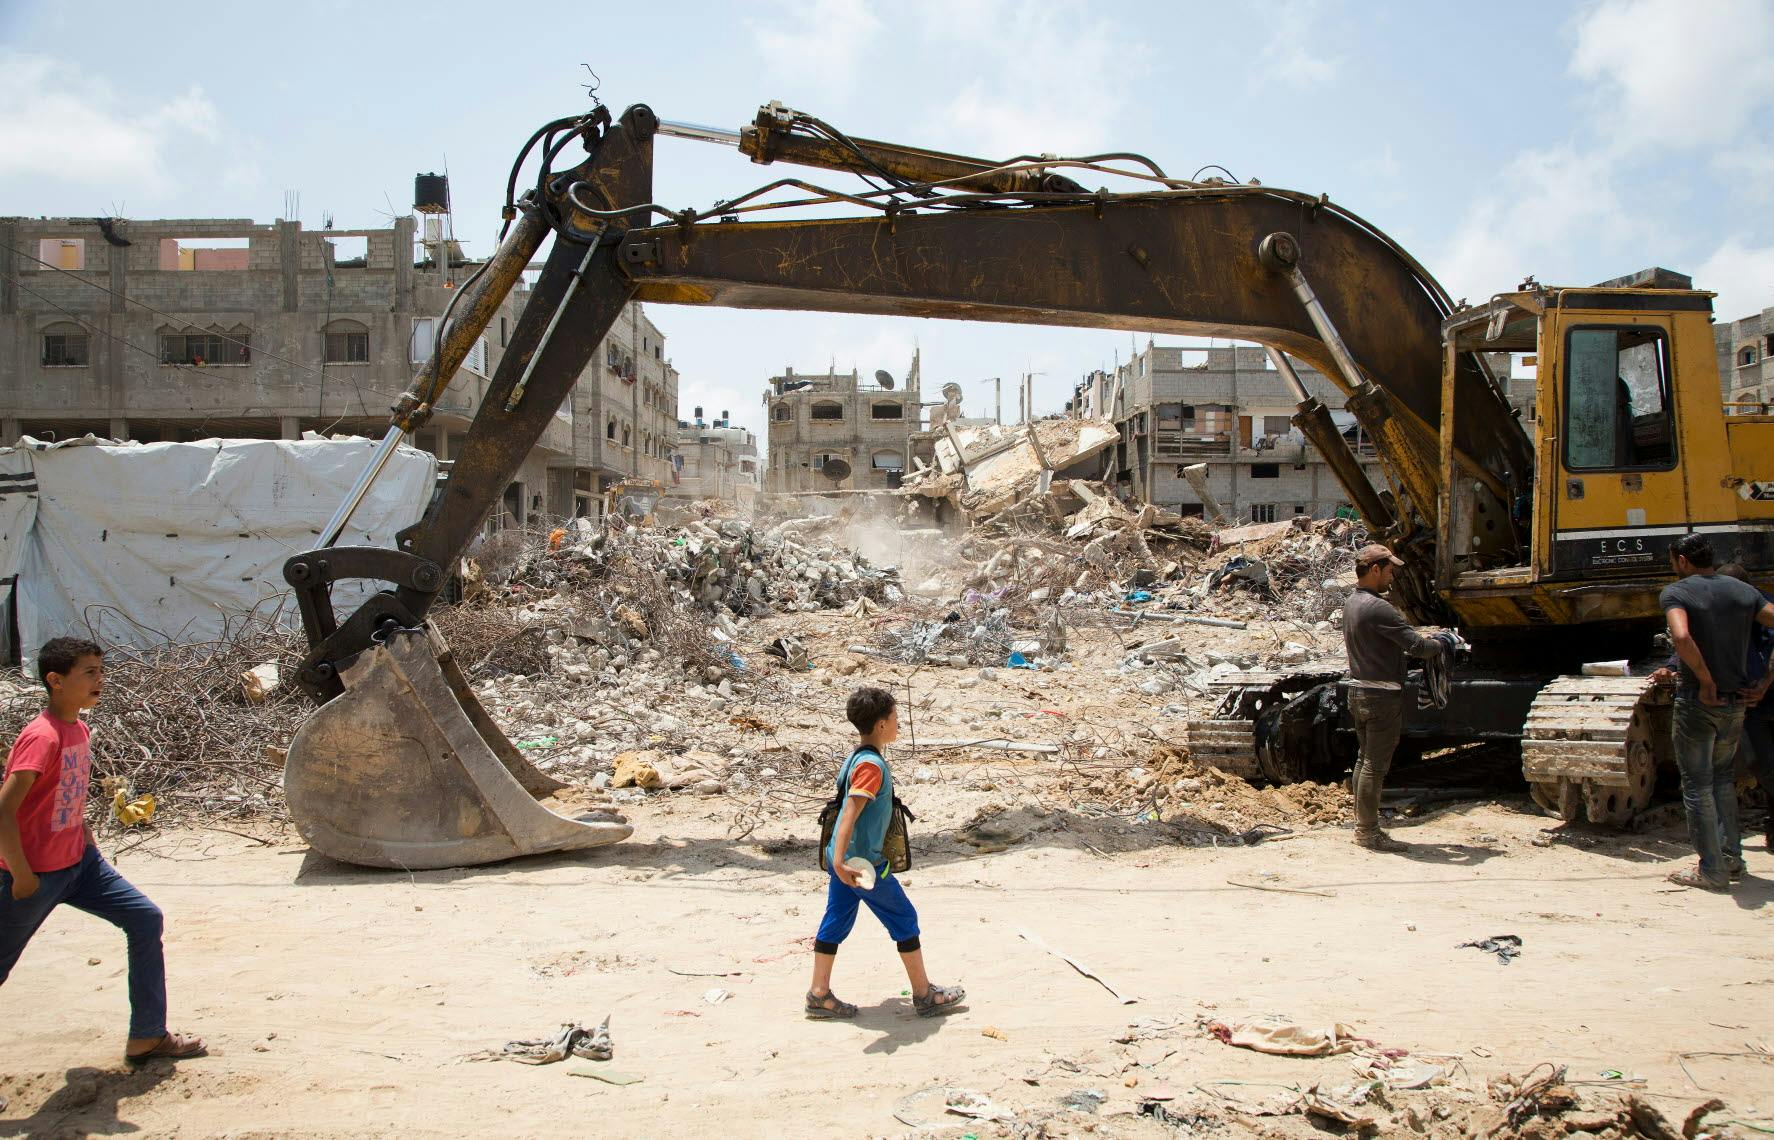 A child passes by a dredger with rubble in the background.